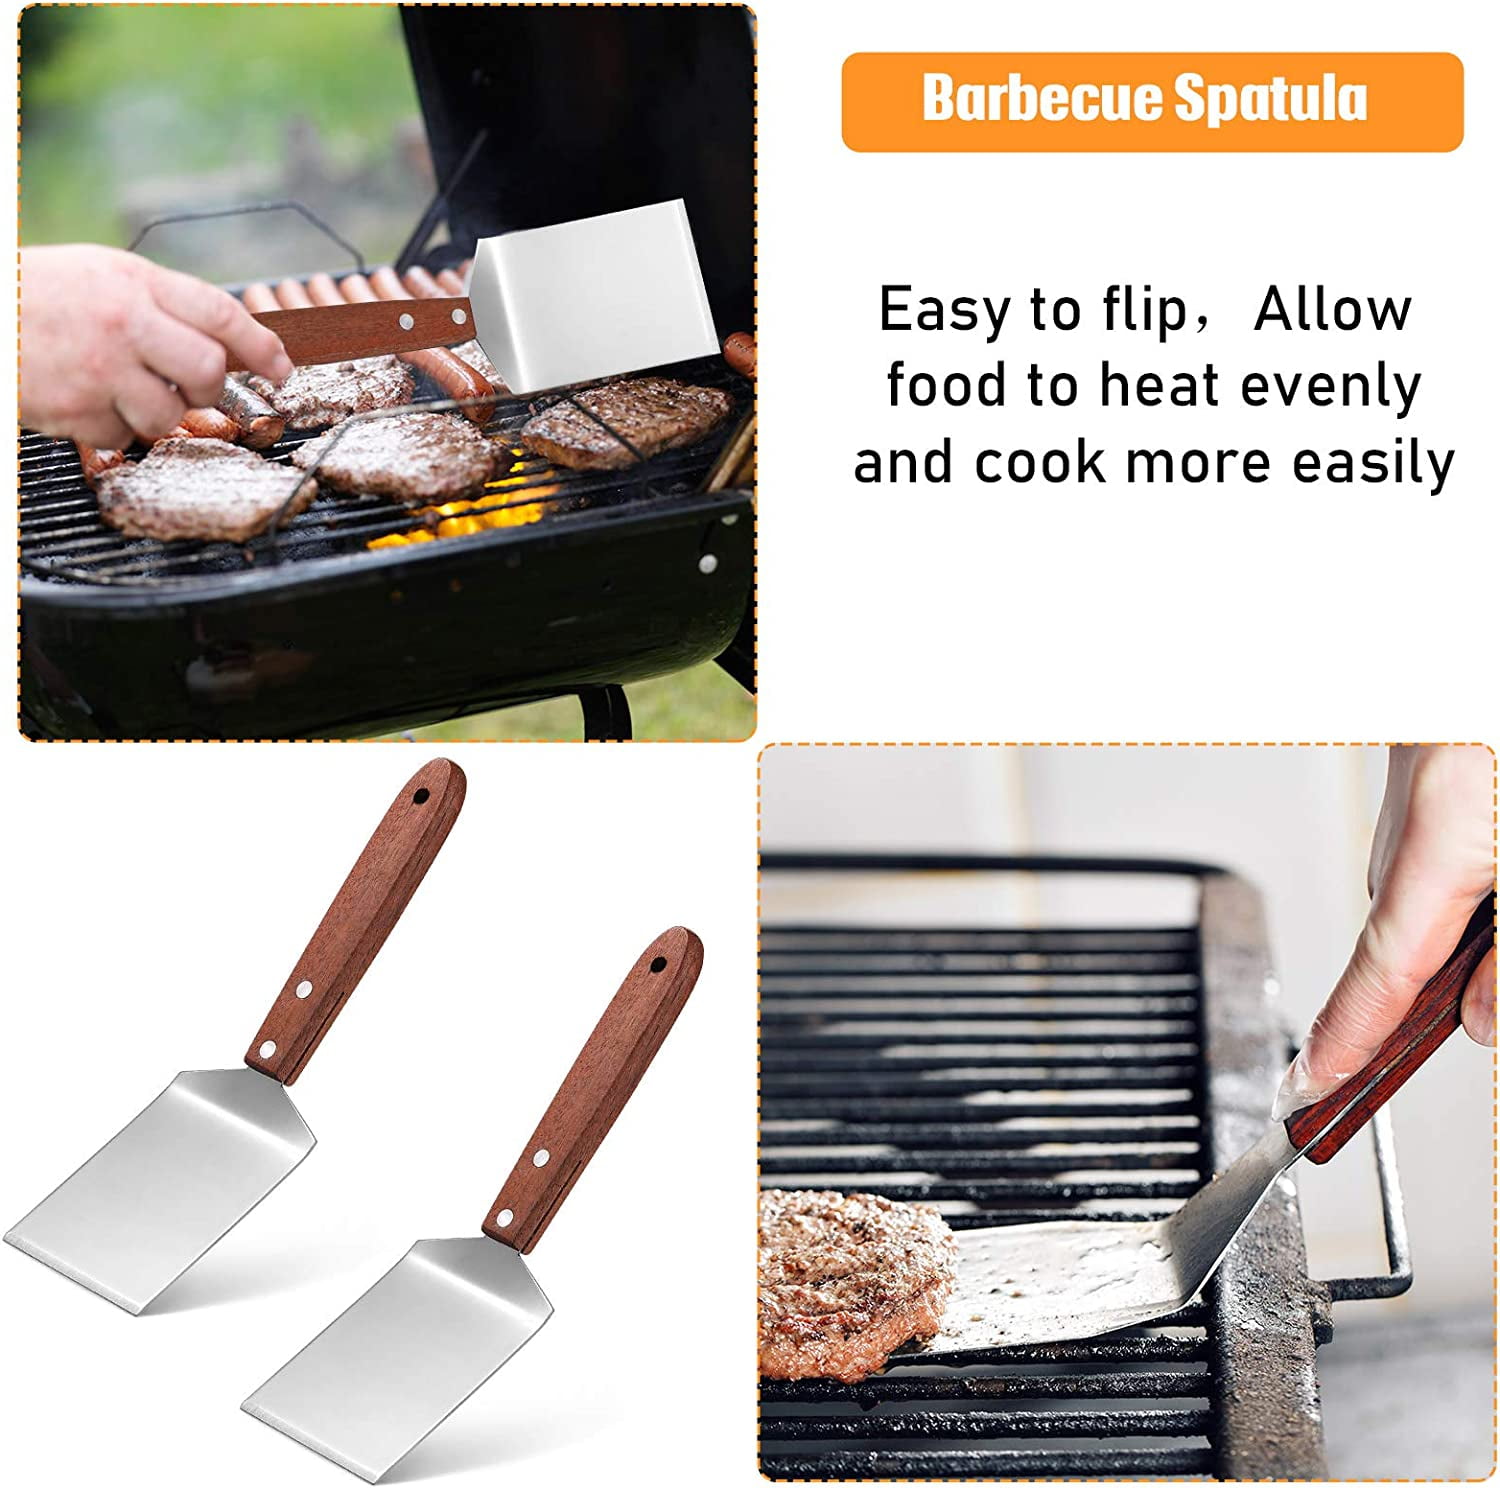  Mini Spatula, Stainless Steel Small Spatula For Kitchen Use, Metal Spatula For Cooking Brownie, Cookie, Lasagna and More, Pie Server  Spatula